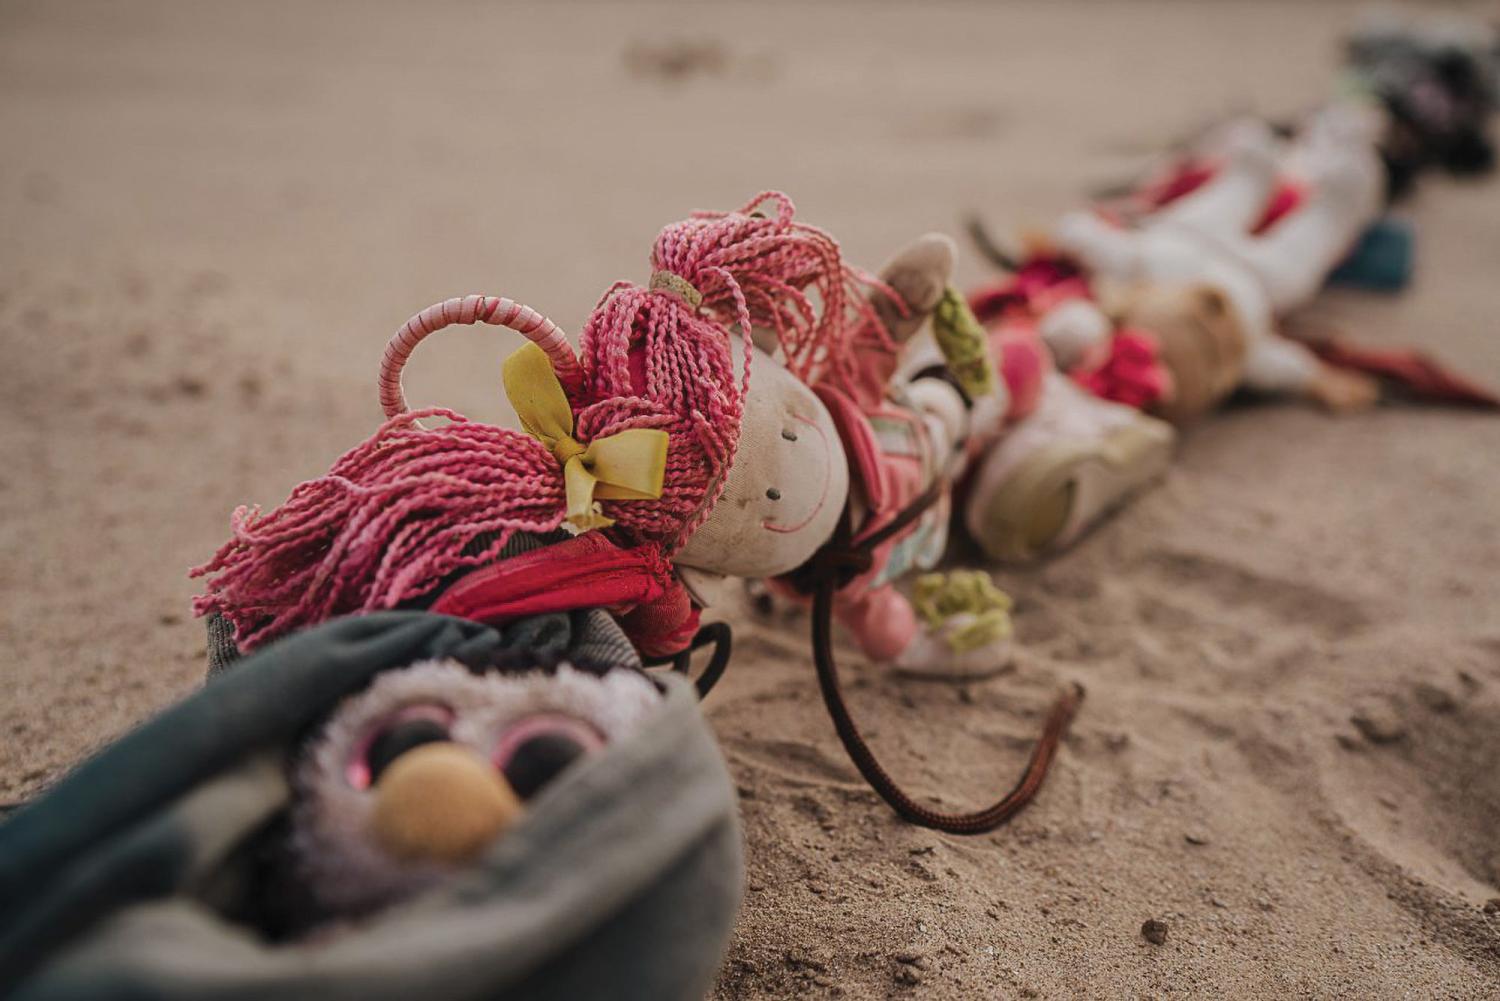 Photograph of toys tied together that are relative to the content of the article "What Remains"